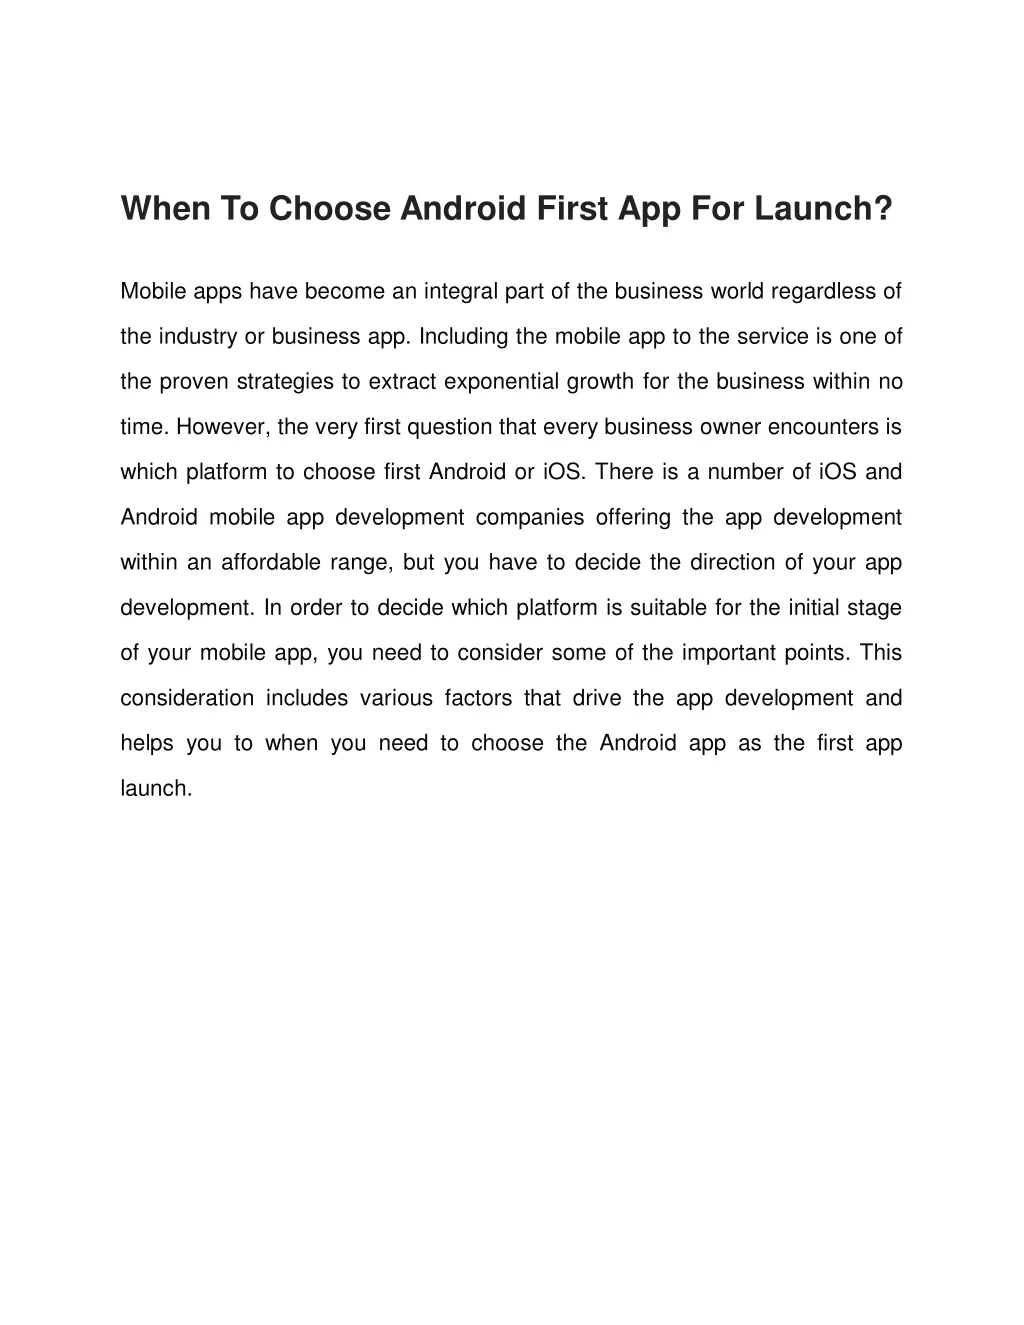 when to choose android first app for launch